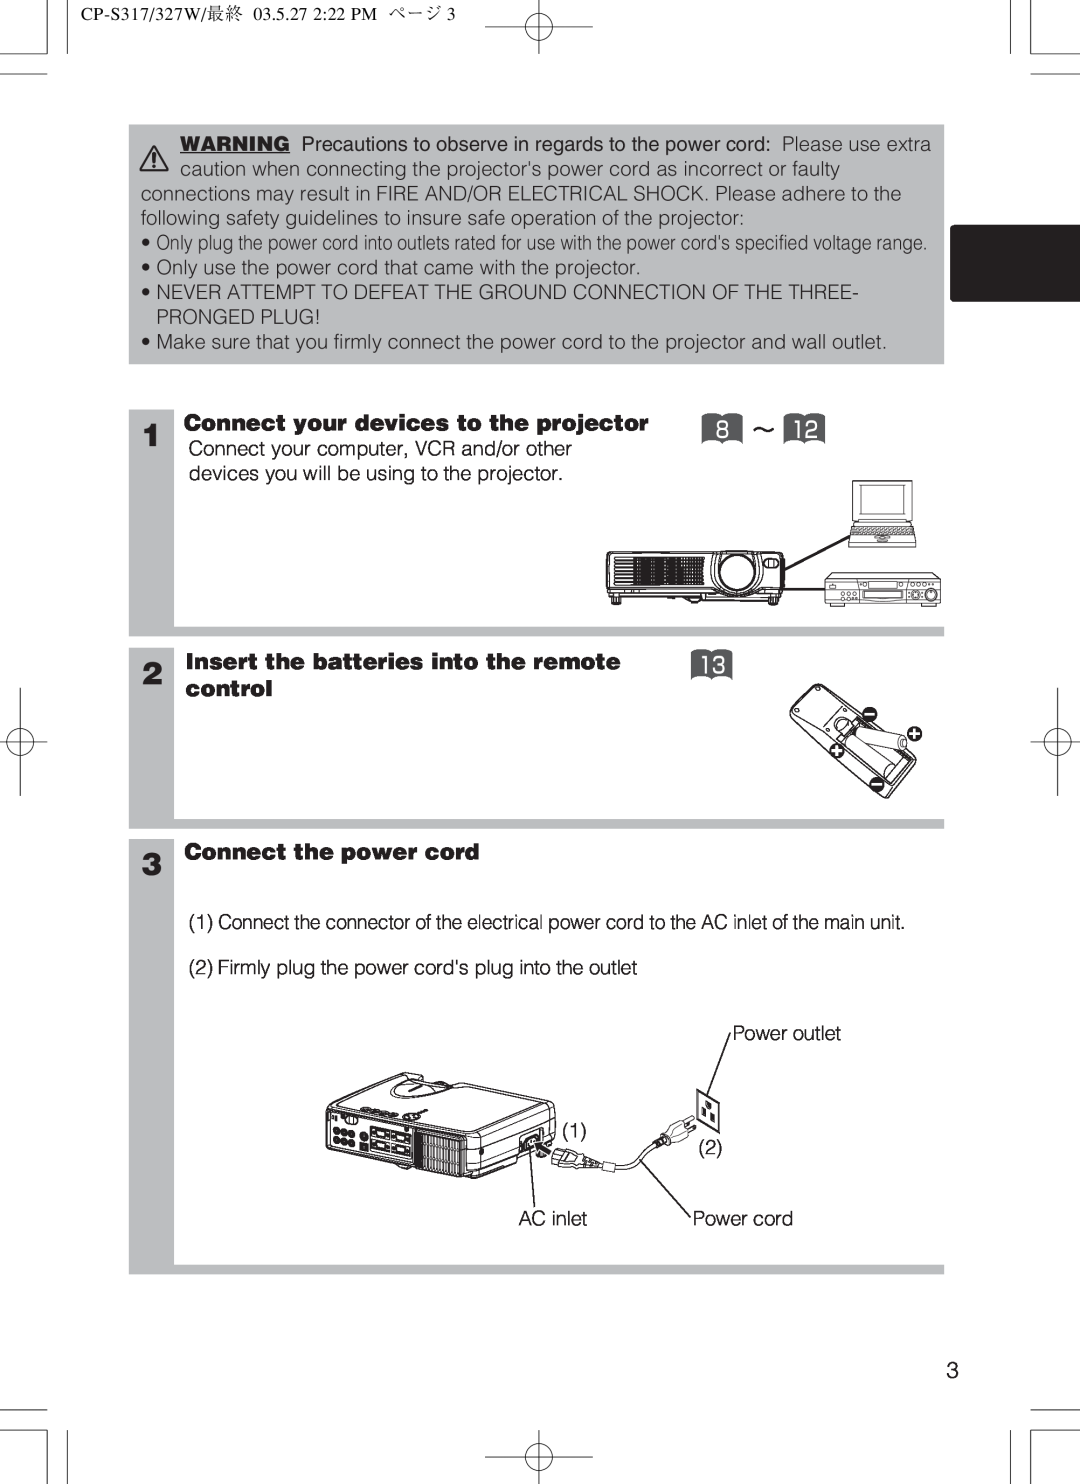 Hitachi cp-s318 user manual Connect your devices to the projector, 8 ～, Insert the batteries into the remote, control 